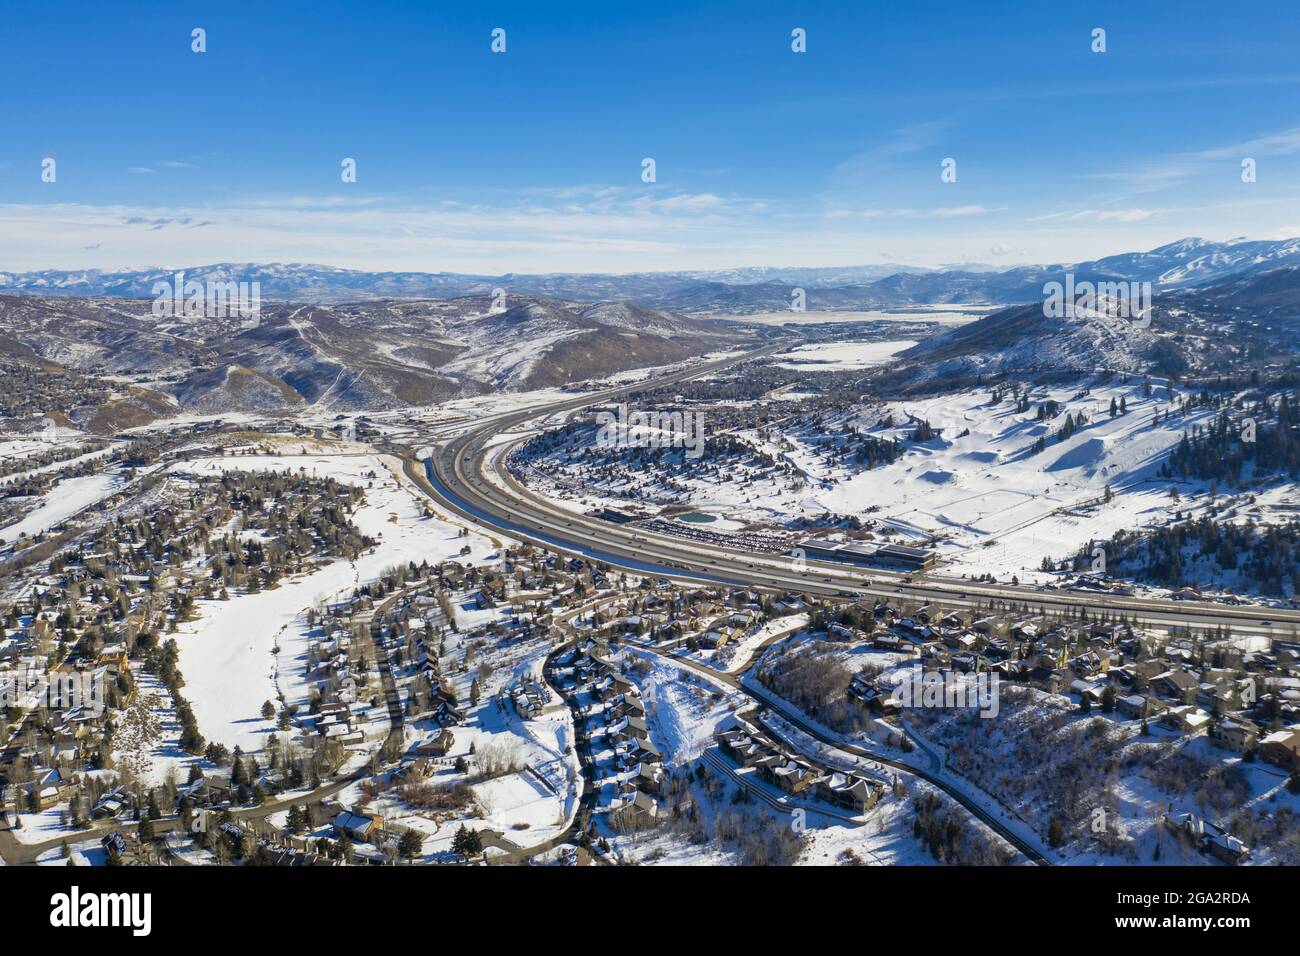 Aerial View over Park City after a winter snowfall, famous for its ski resorts and ; Park City, Summit County, Utah, United States of America Stock Photo